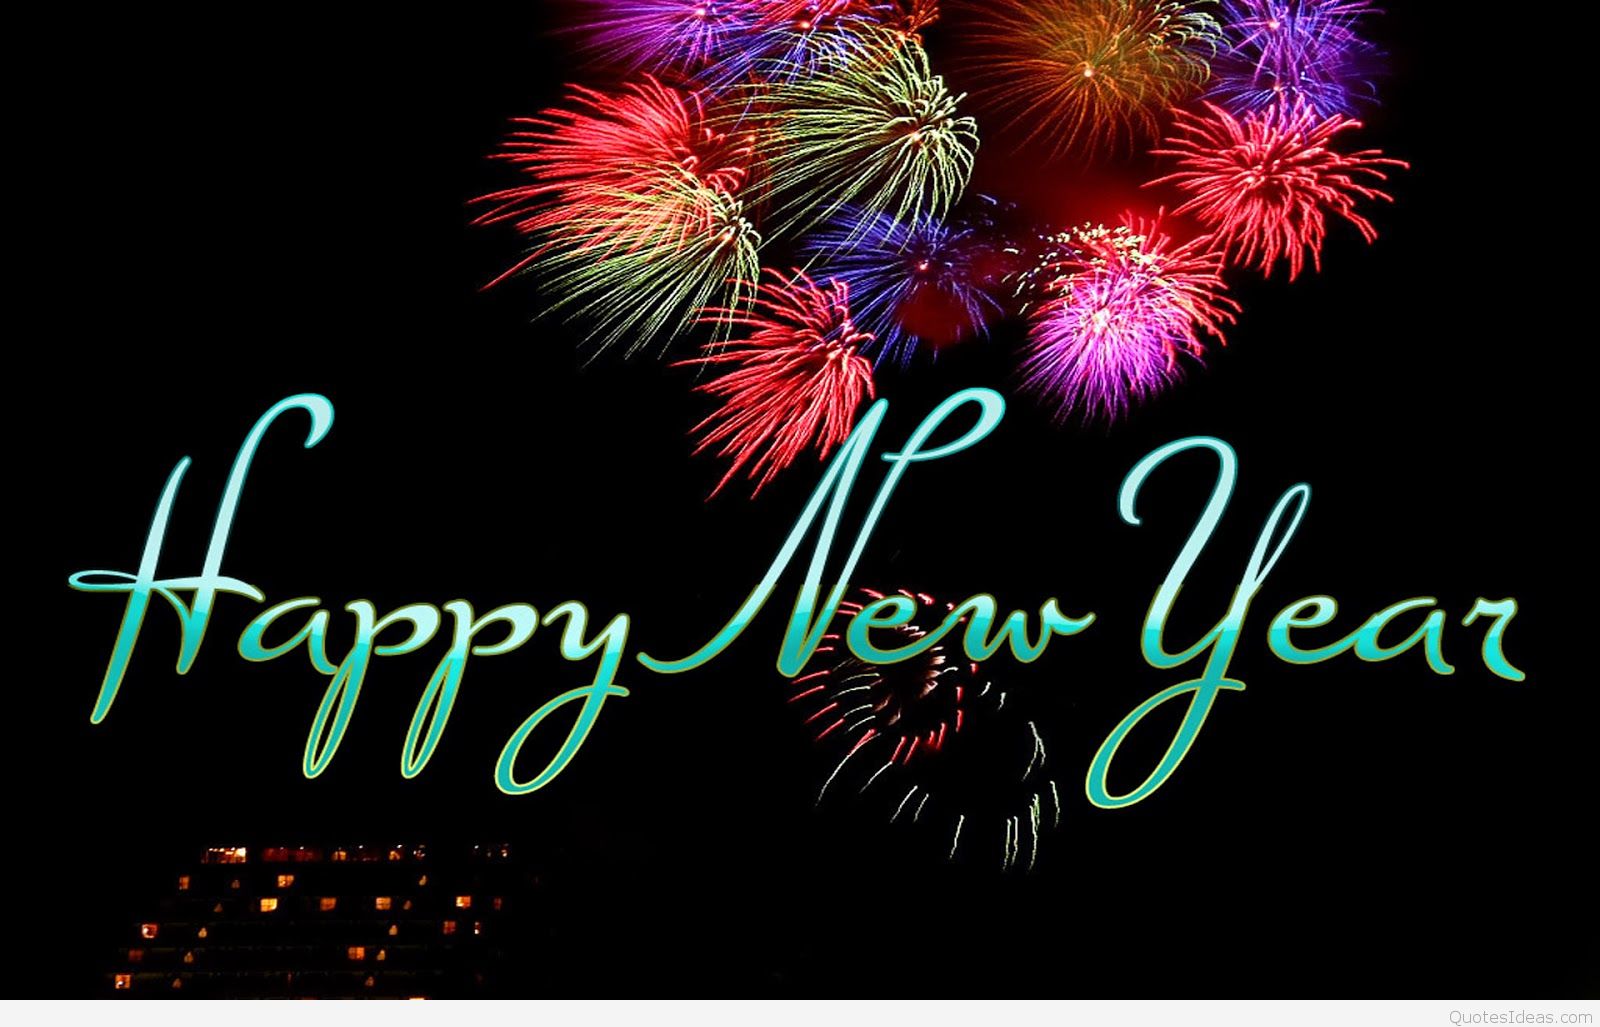 happy new year animated wallpaper,fireworks,new years day,text,new year,event